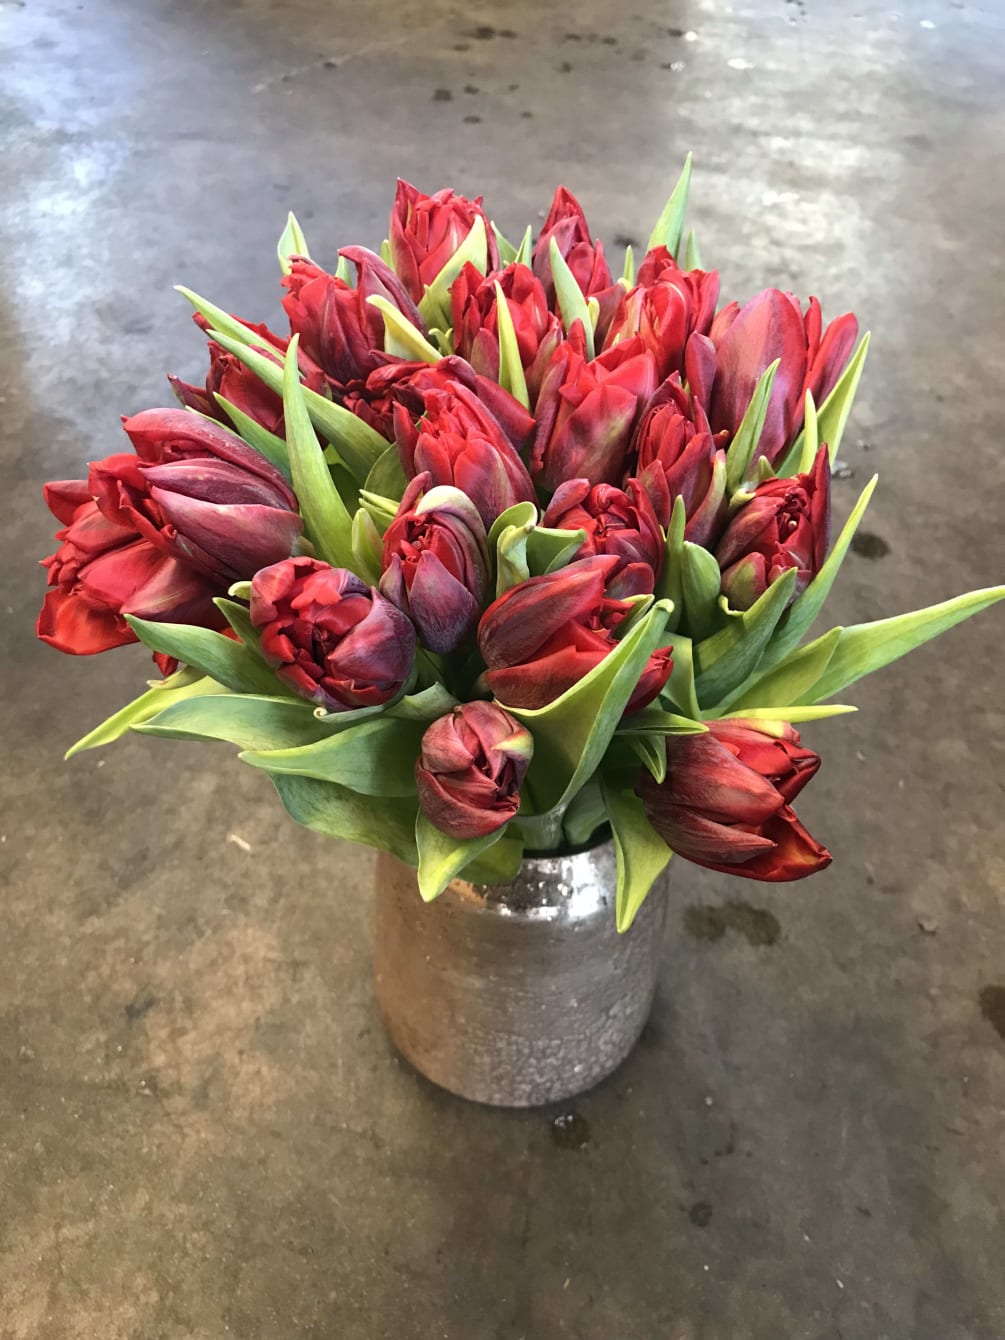 With a touch of spring, this bunch of tulips will brighten your